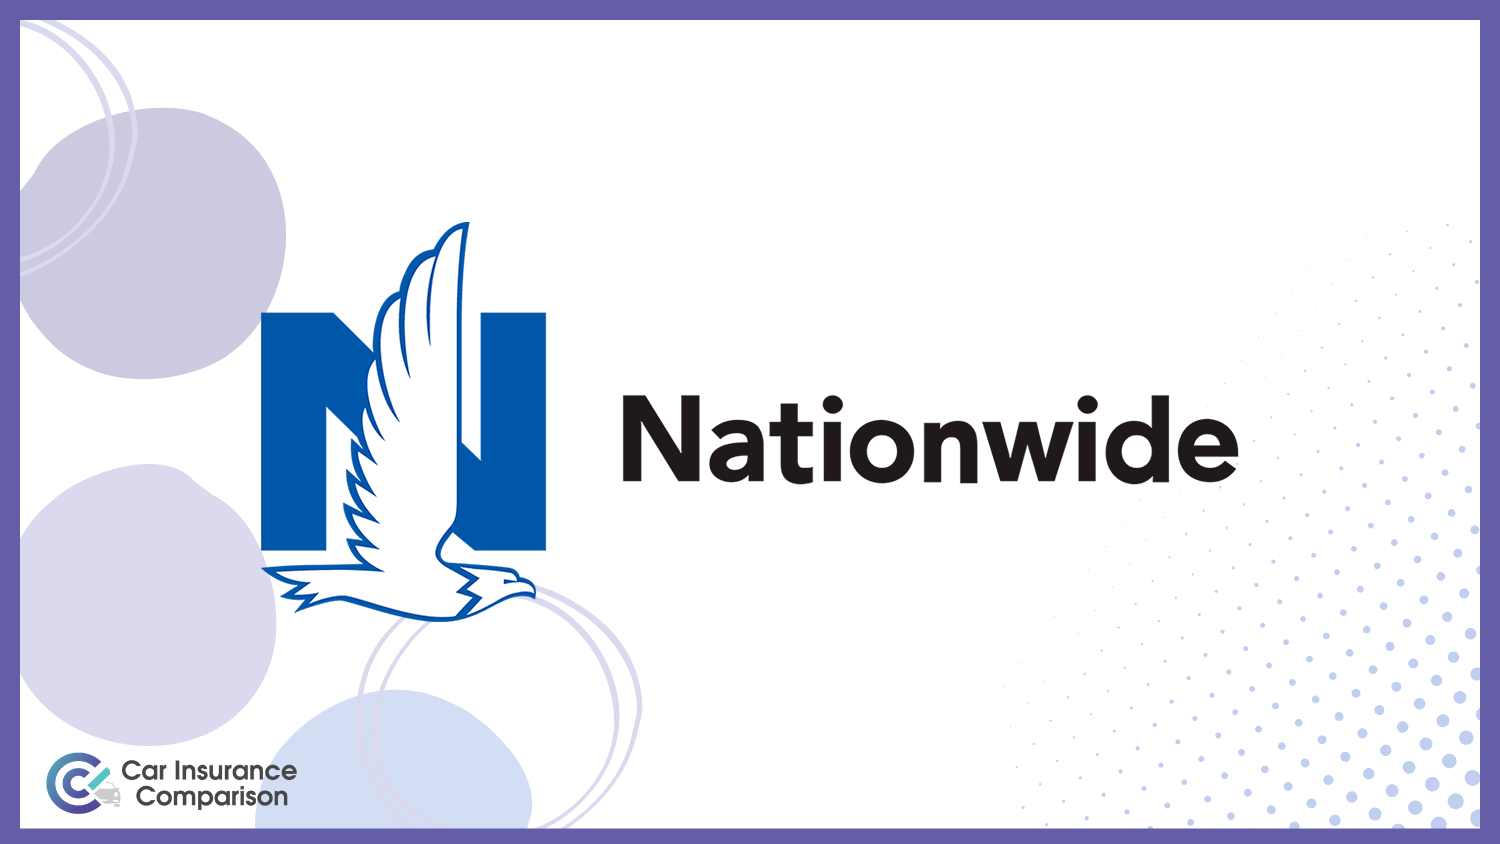 Nationwide: Best Car Insurance for Home-Care Worker